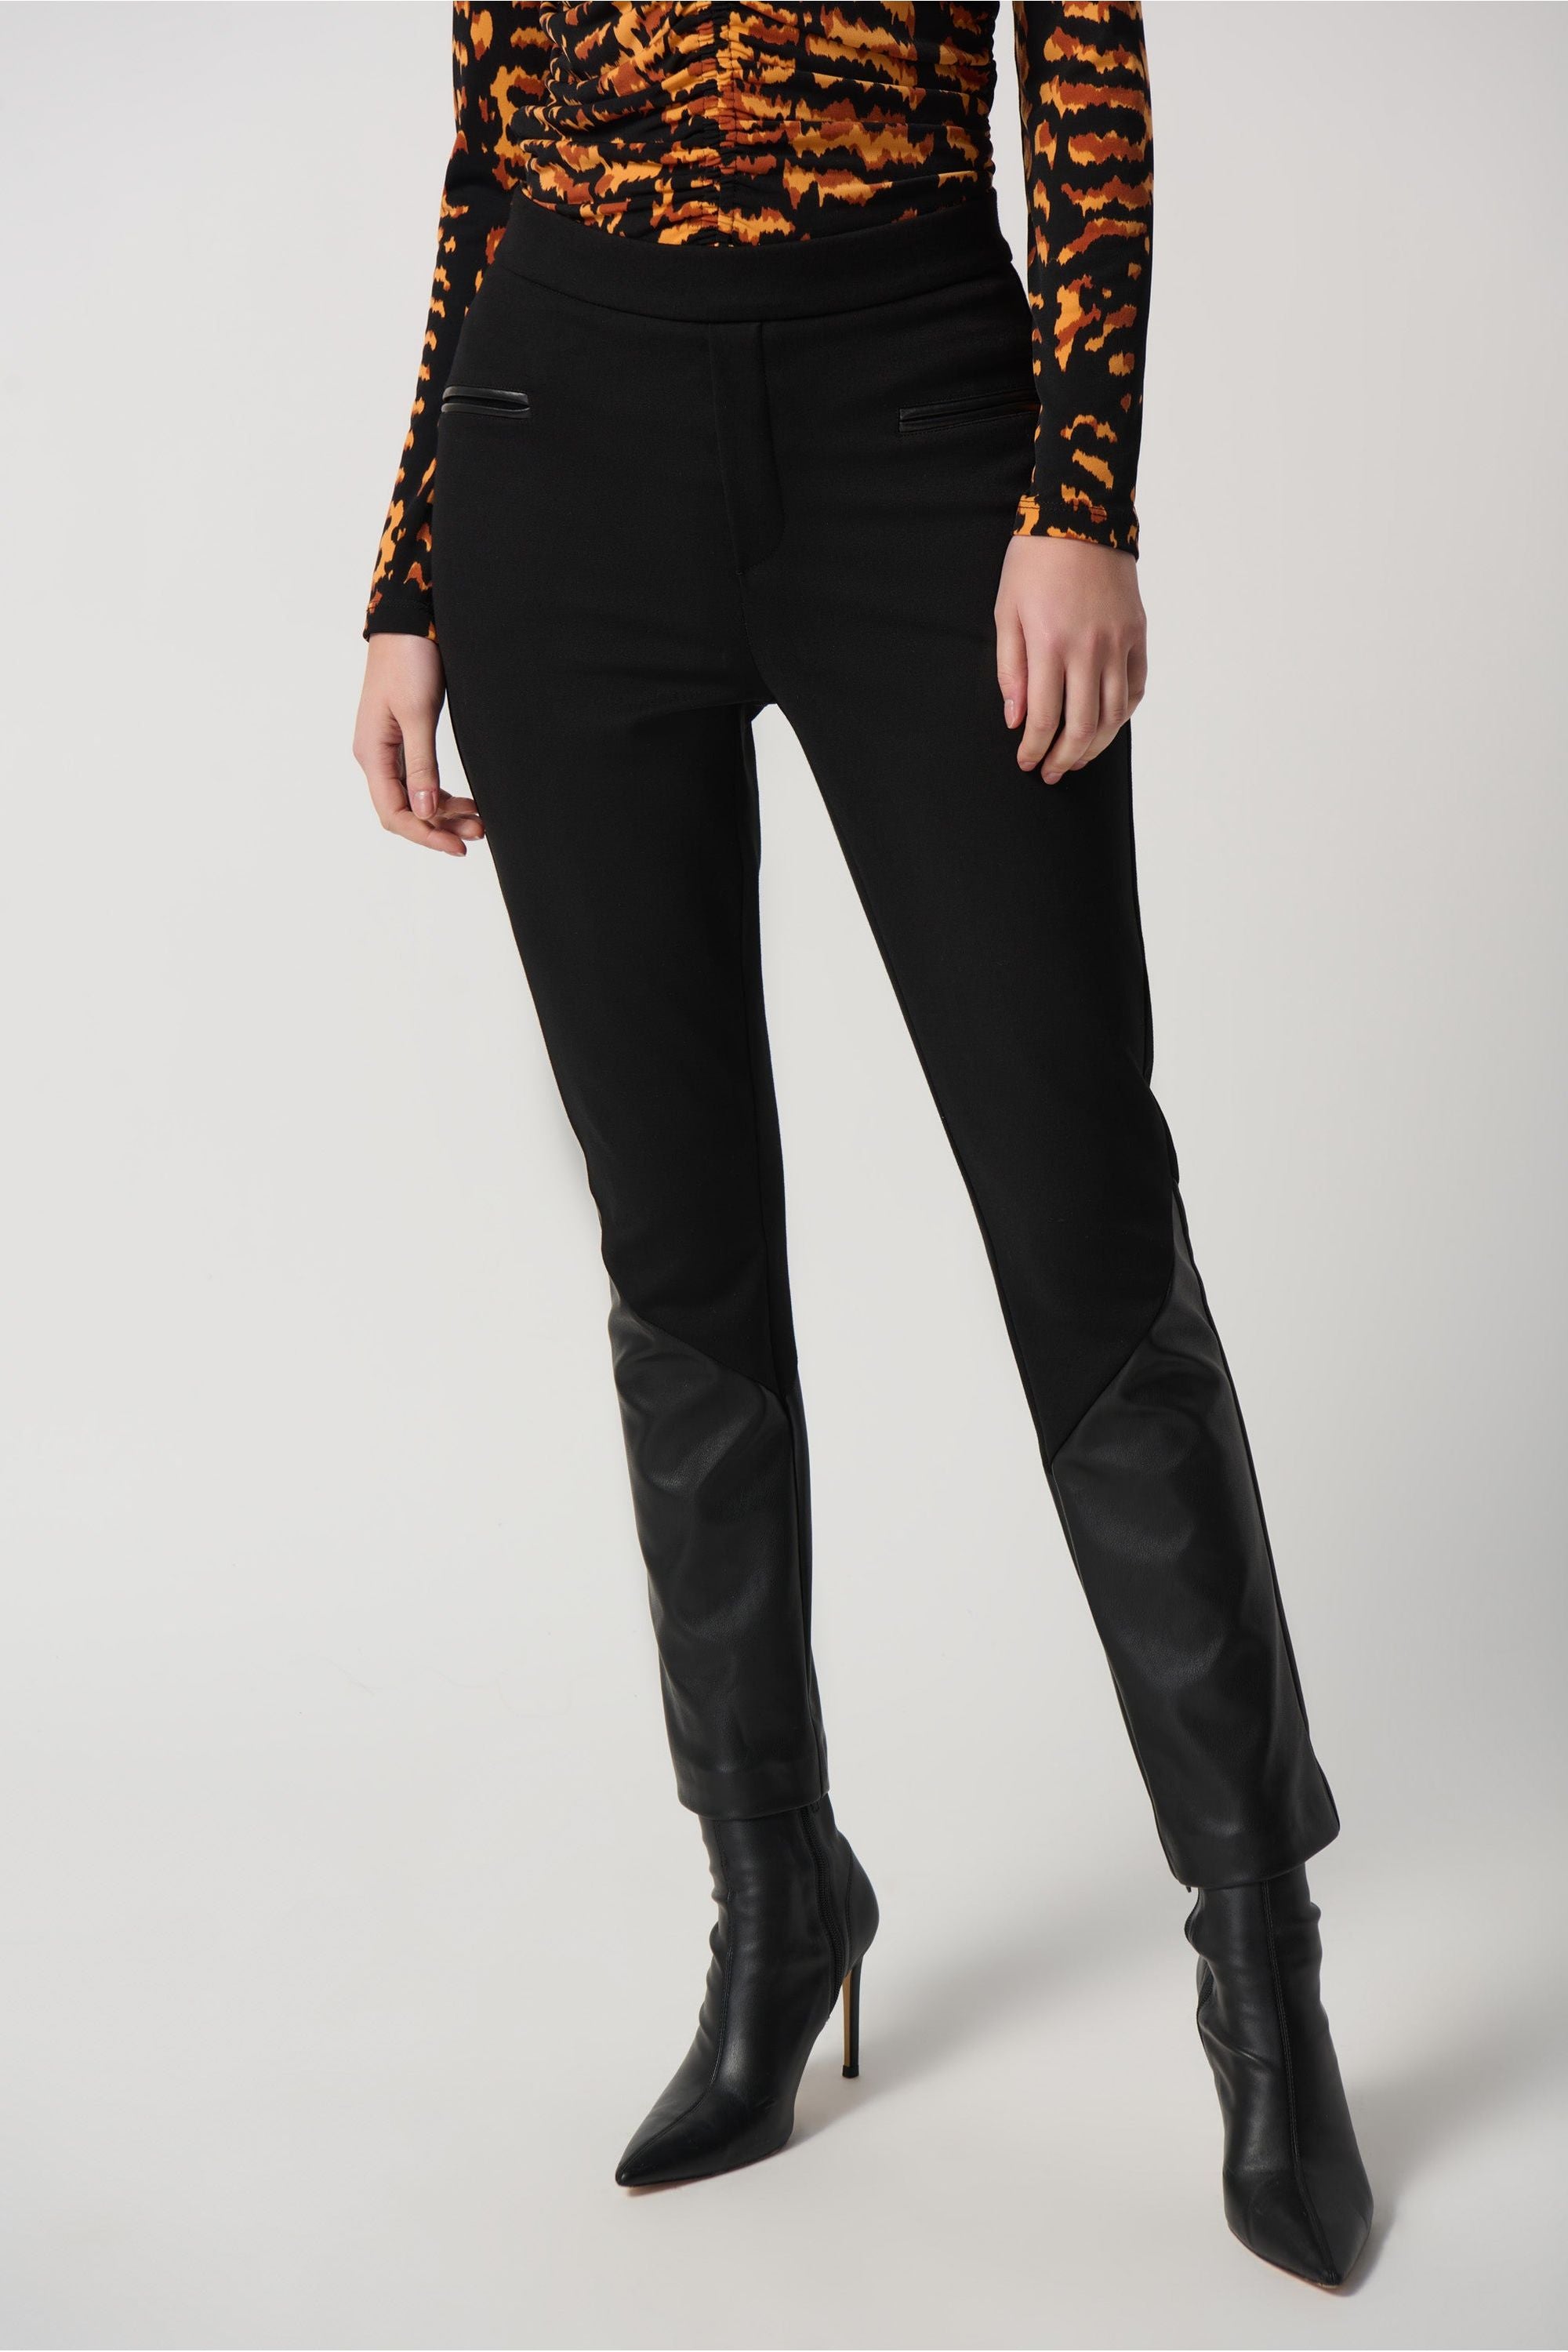 Joseph Ribkoff Heavy Knit and Faux Leather Pants - Style 234036 – Close To  You Boutique